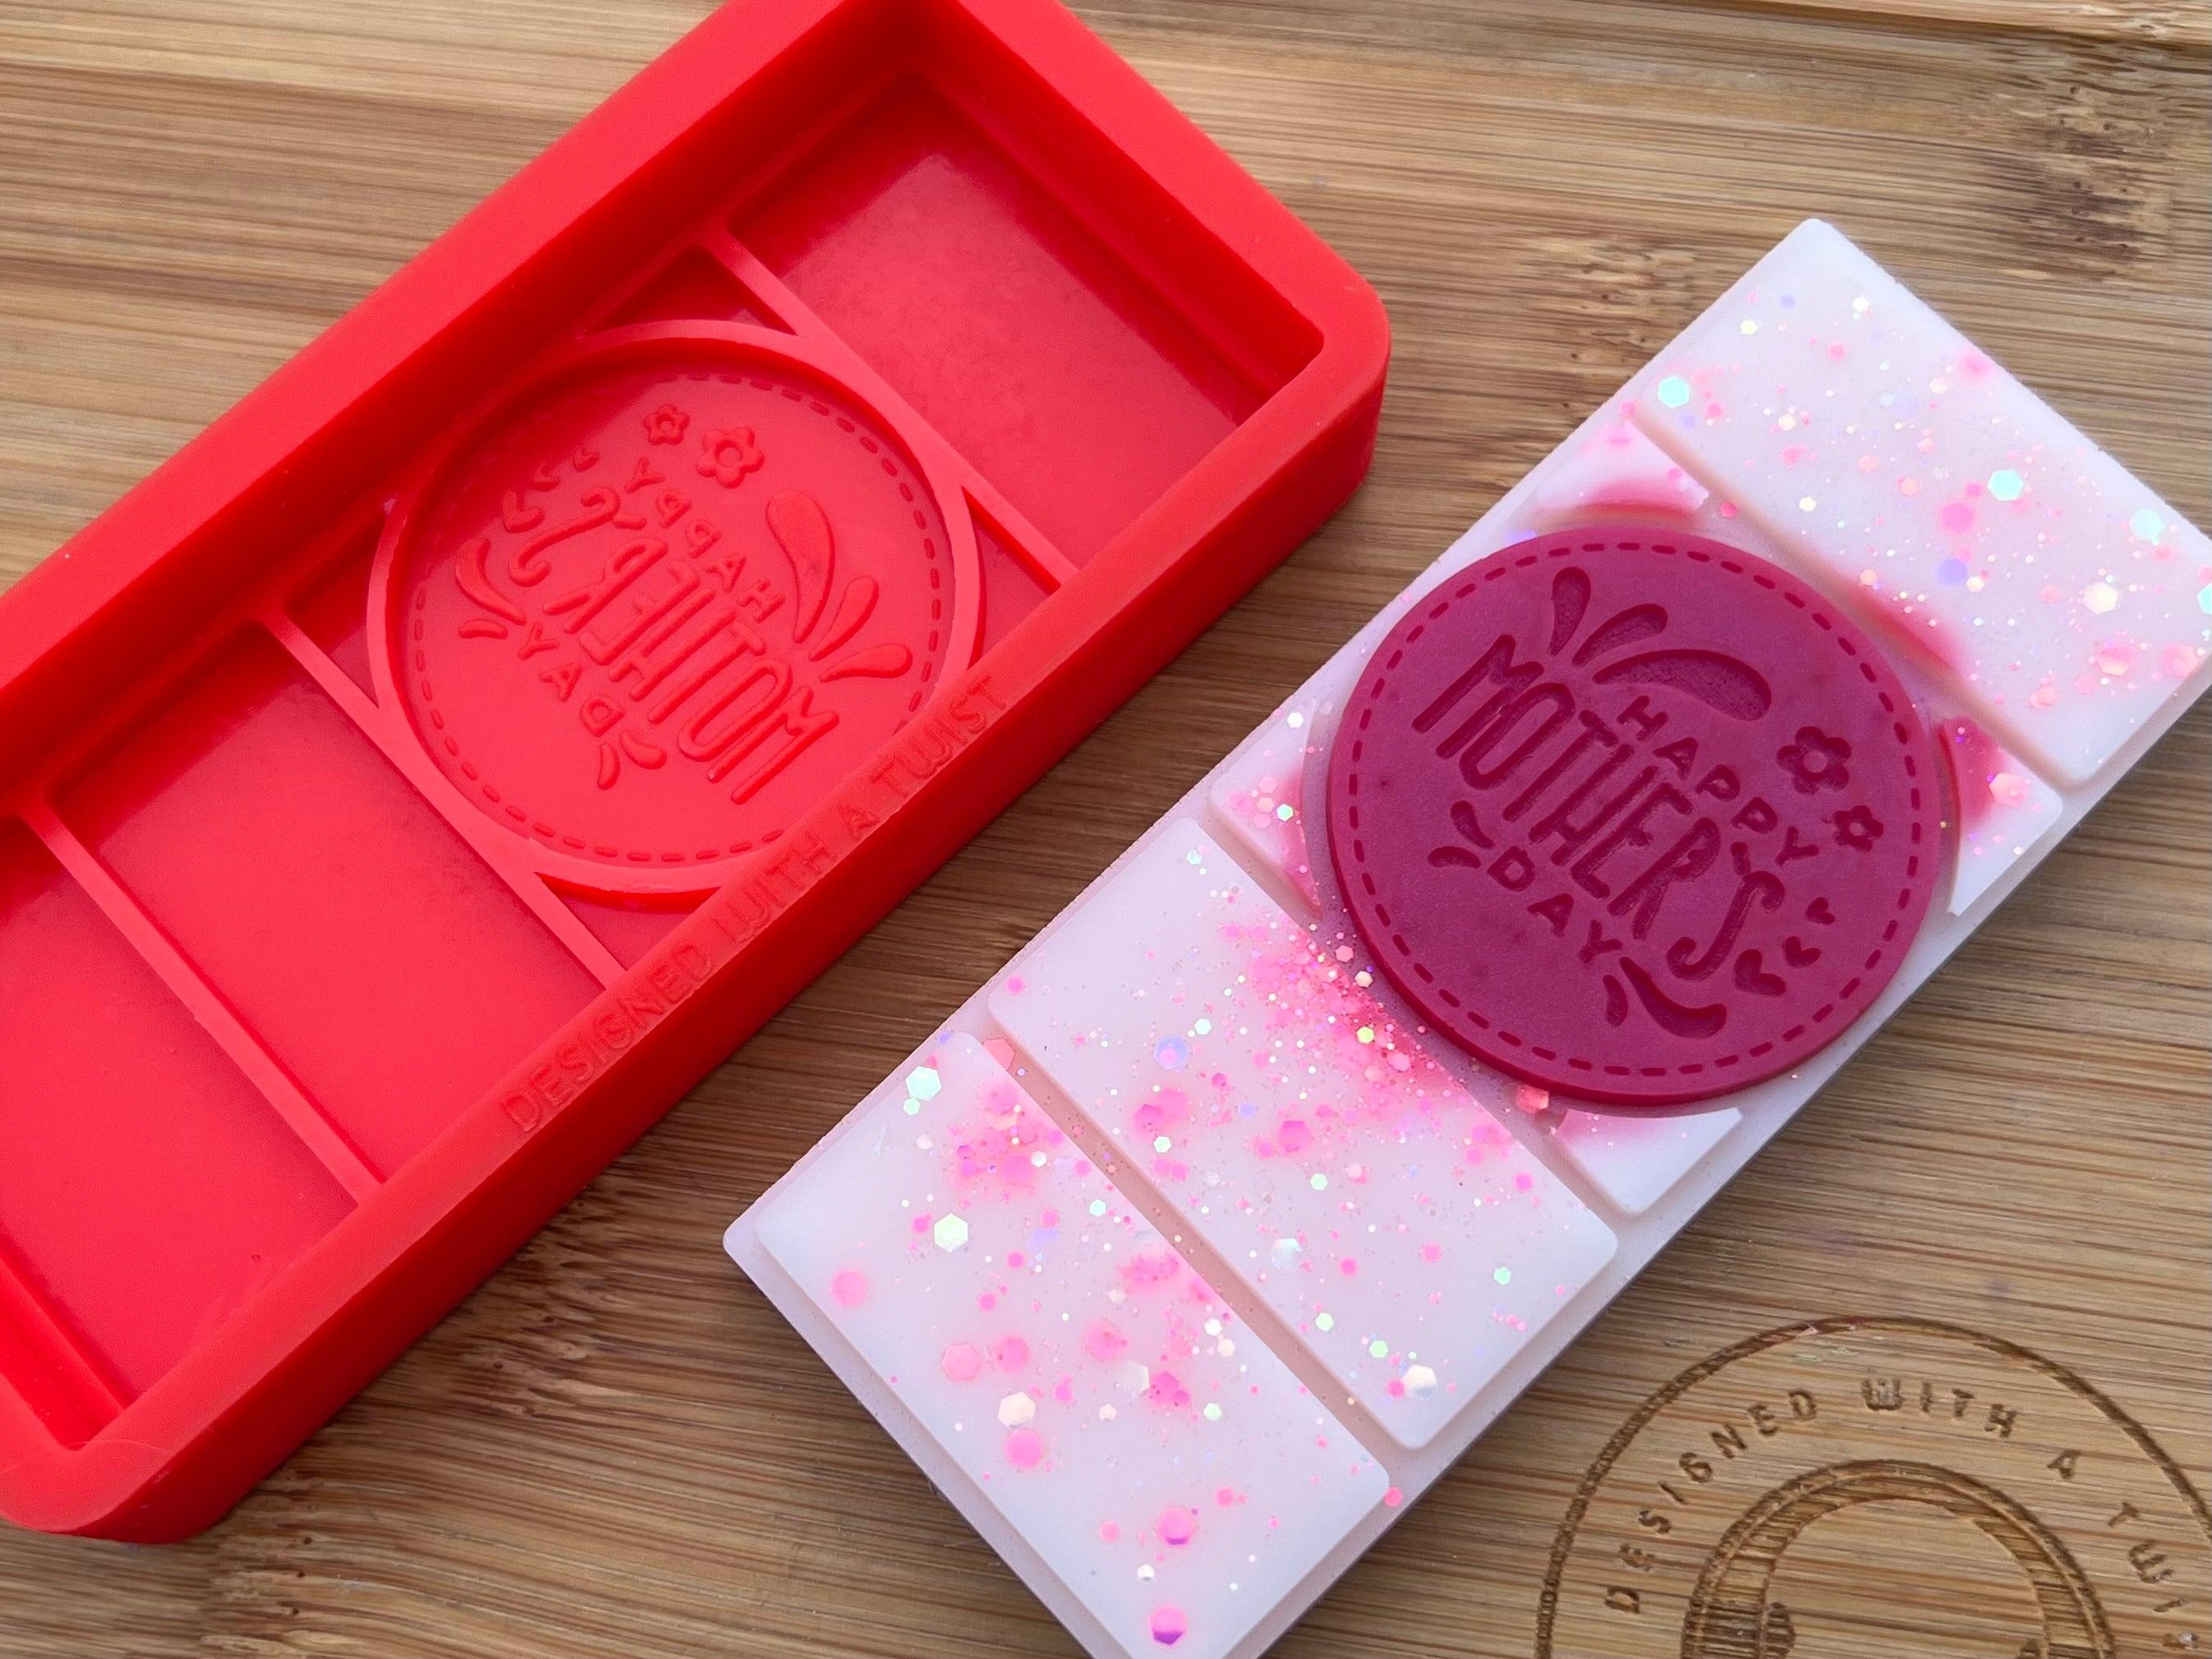 Happy Mothers Day Snapbar Silicone Mold - Designed with a Twist - Top quality silicone molds made in the UK.